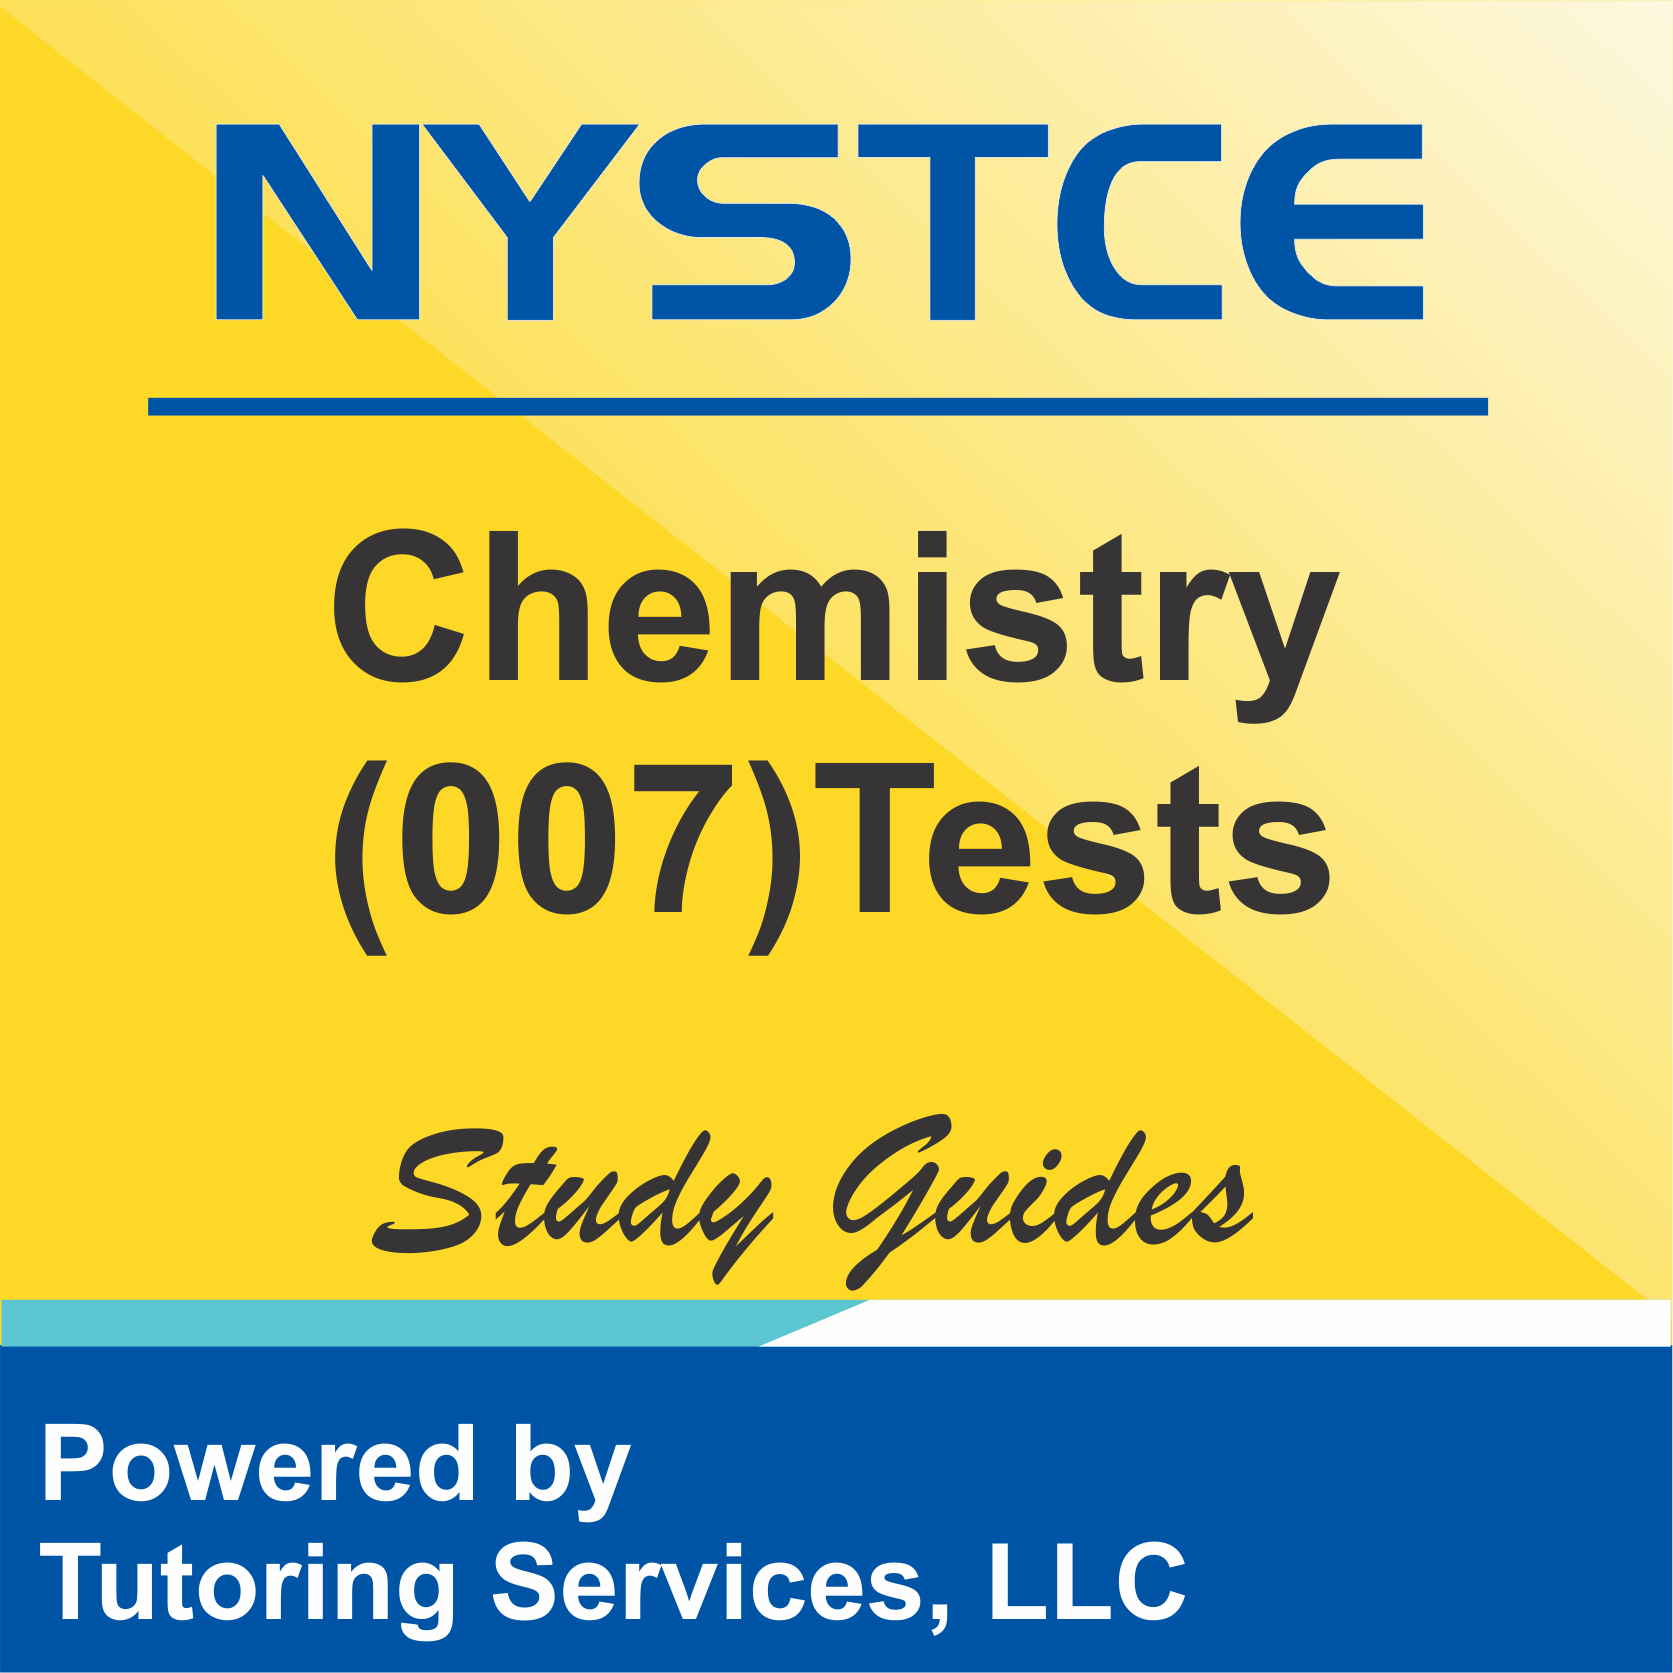 NYSTCE New York State Assessment Information for Chemistry 007